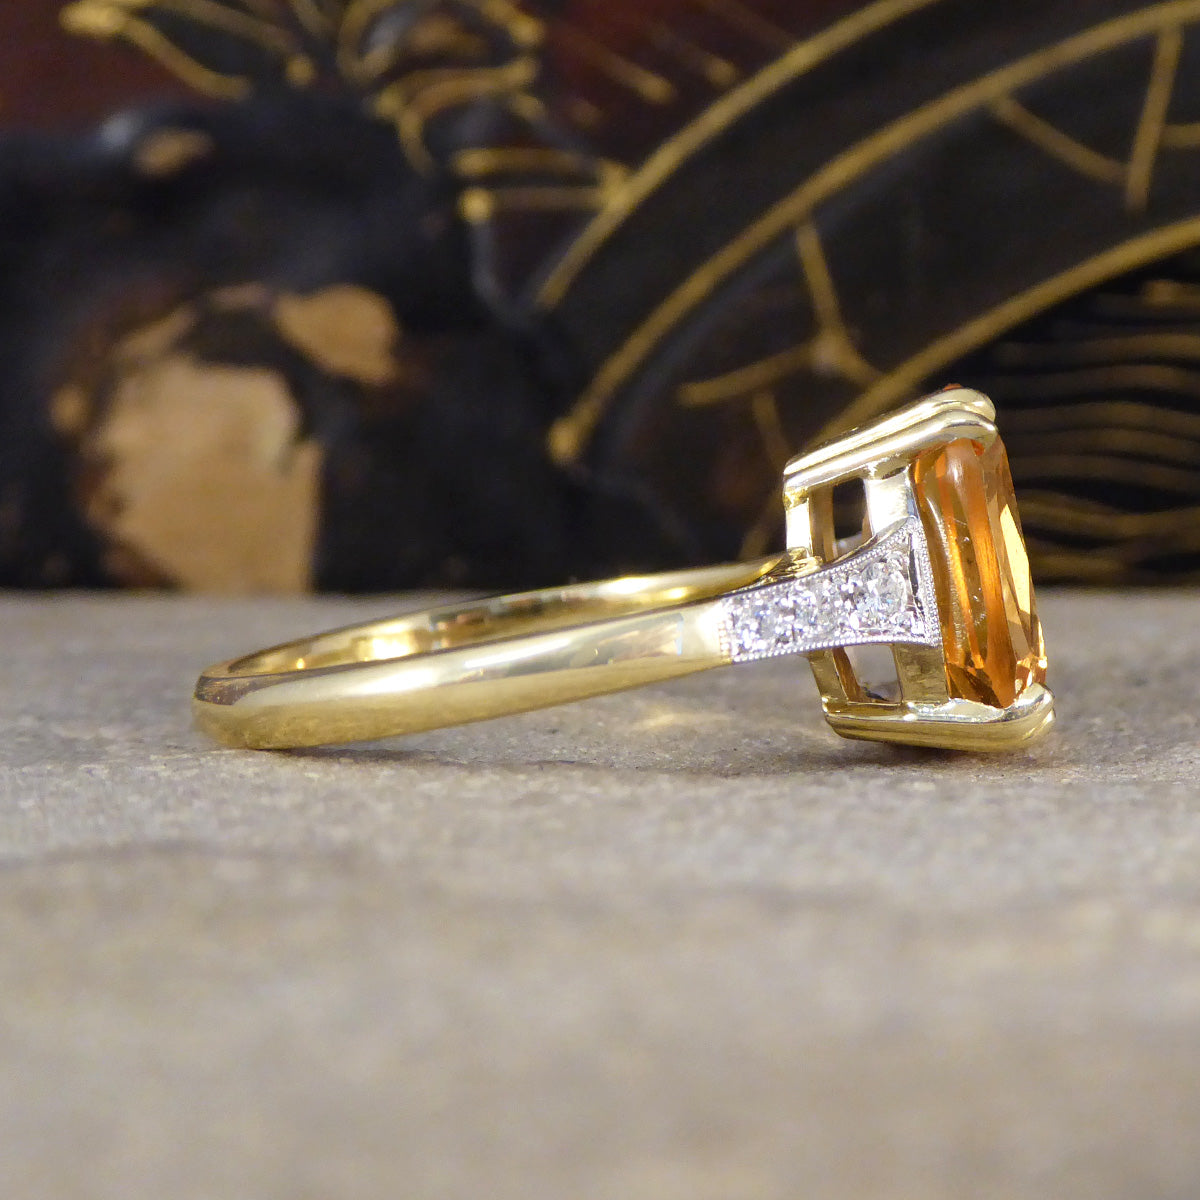 5.12ct Imperial Topaz Ring with Diamond Set Tapered Shoulders in 18ct Yellow Gold